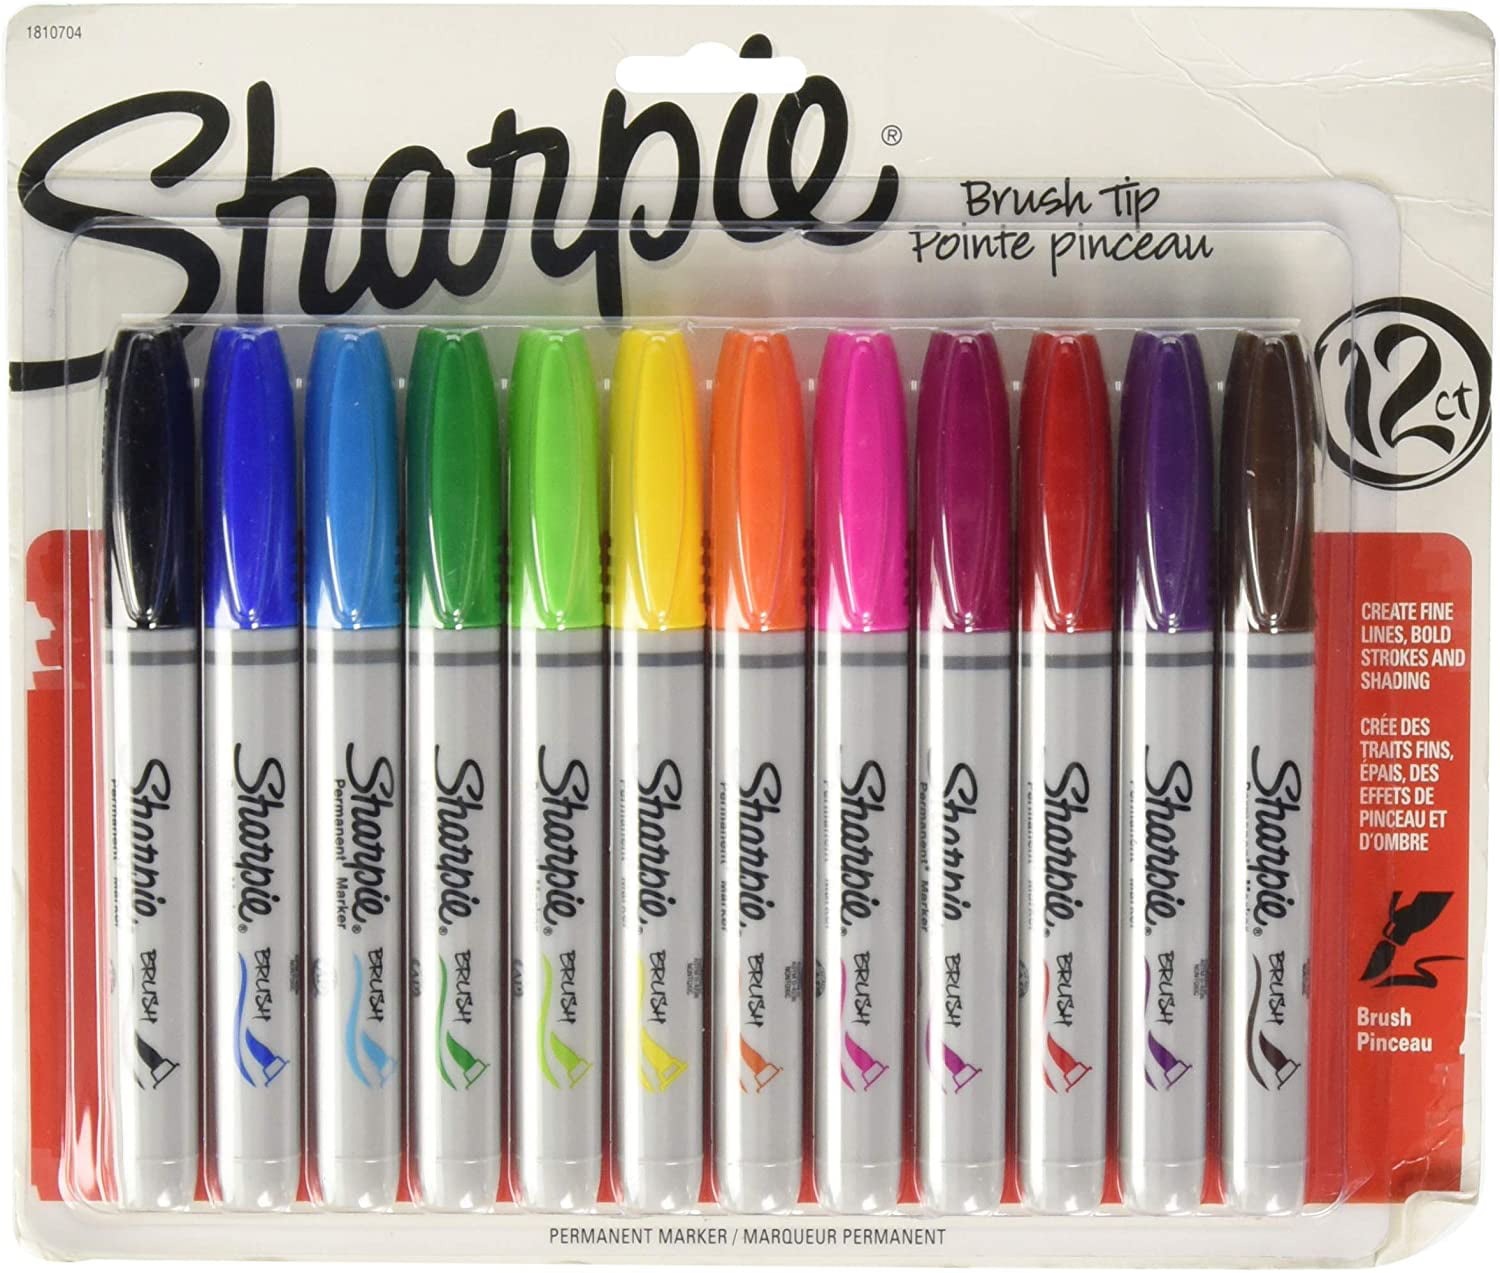 Sharpie 1810704  Permanent Markers Assorted New Free Ship 12 Pack Brush Tip 